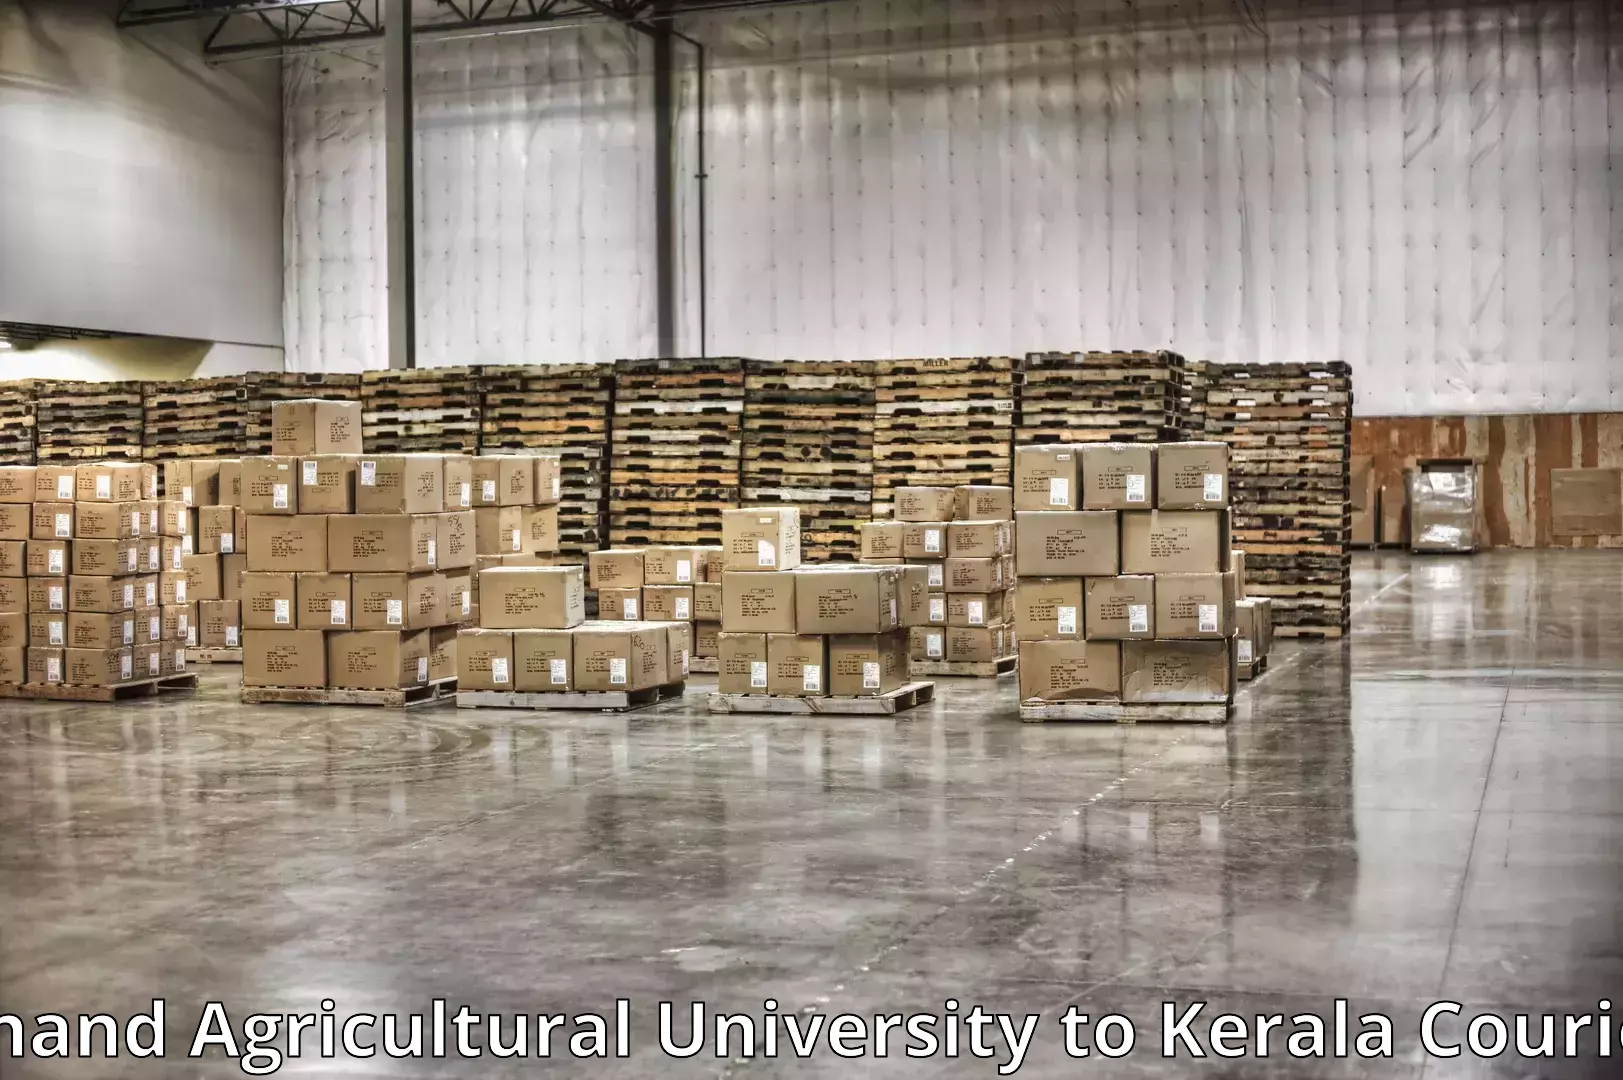 Furniture transport solutions Anand Agricultural University to Pazhayannur